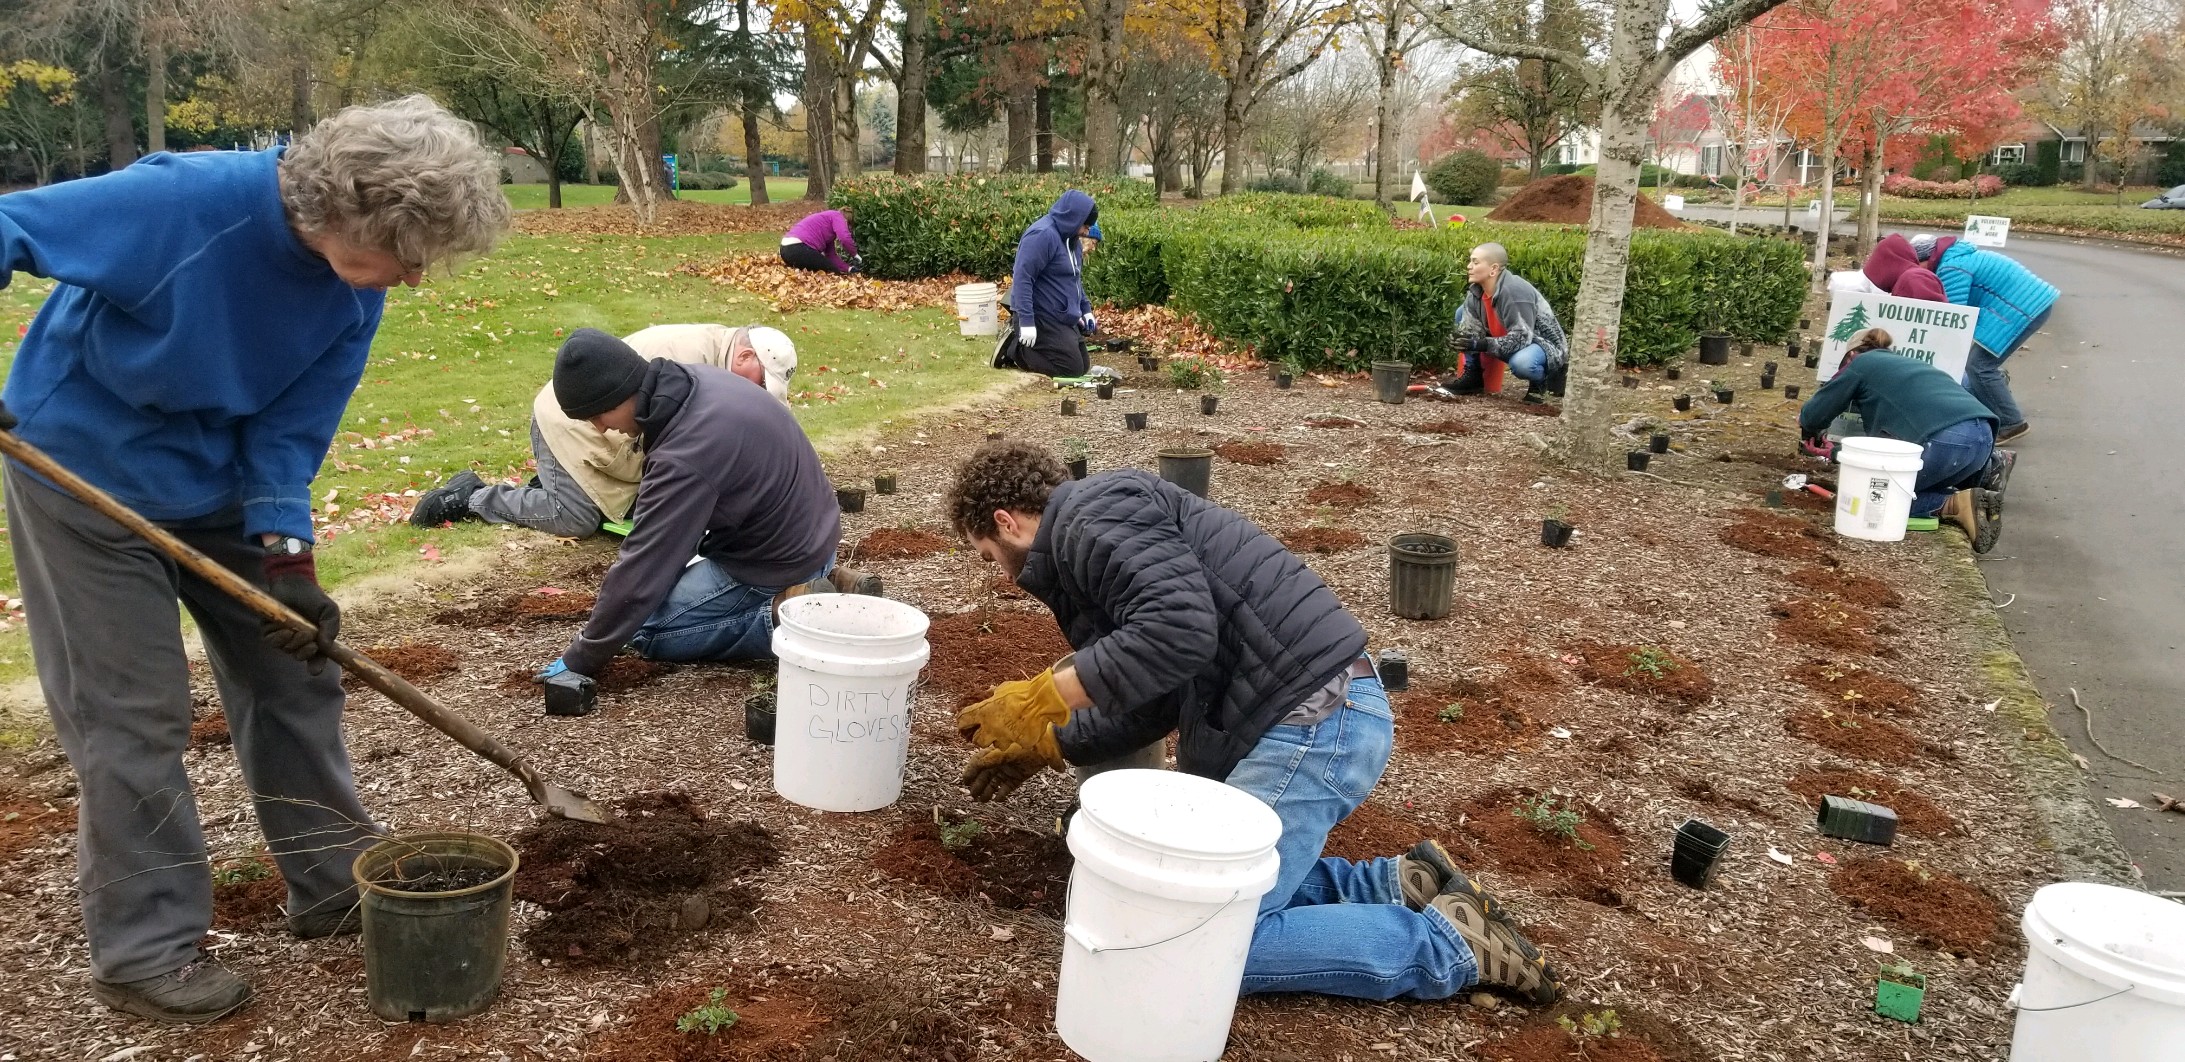 a few volunteers kneel on the ground with buckets to put plants in the ground, one volunteer stands with a shovel